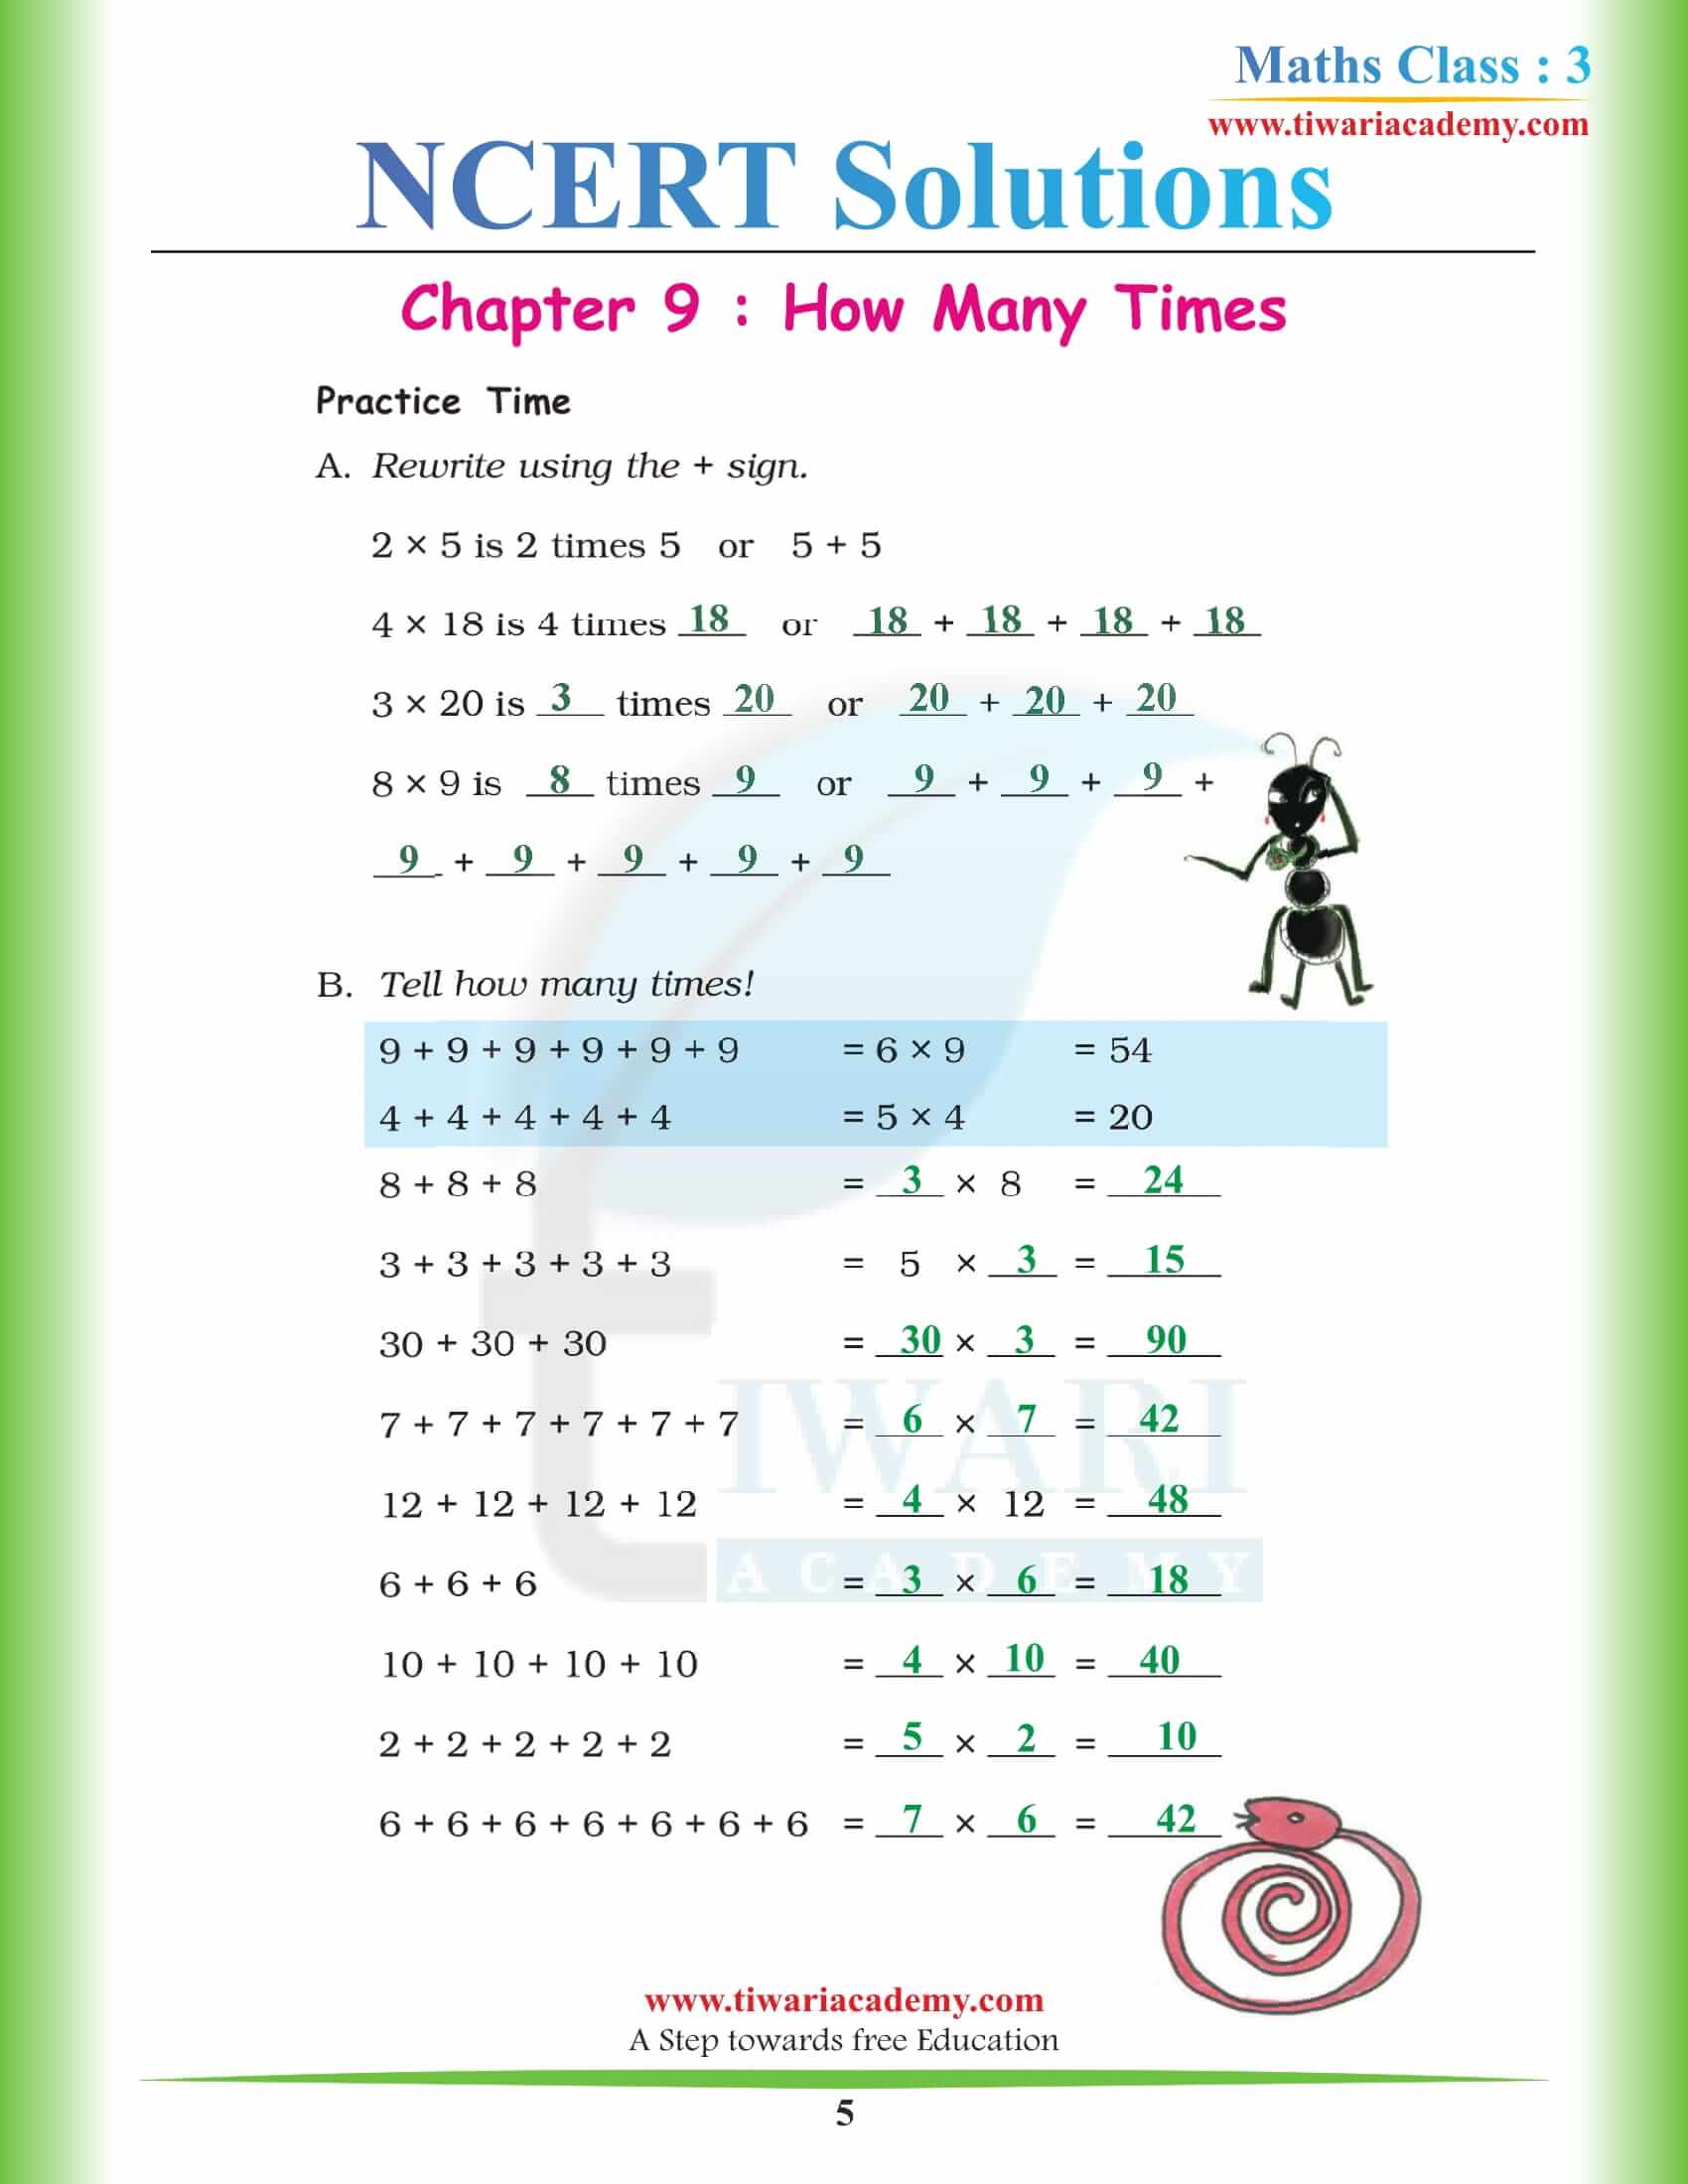 NCERT Solutions for Class 3 Maths Chapter 9 in PDF format